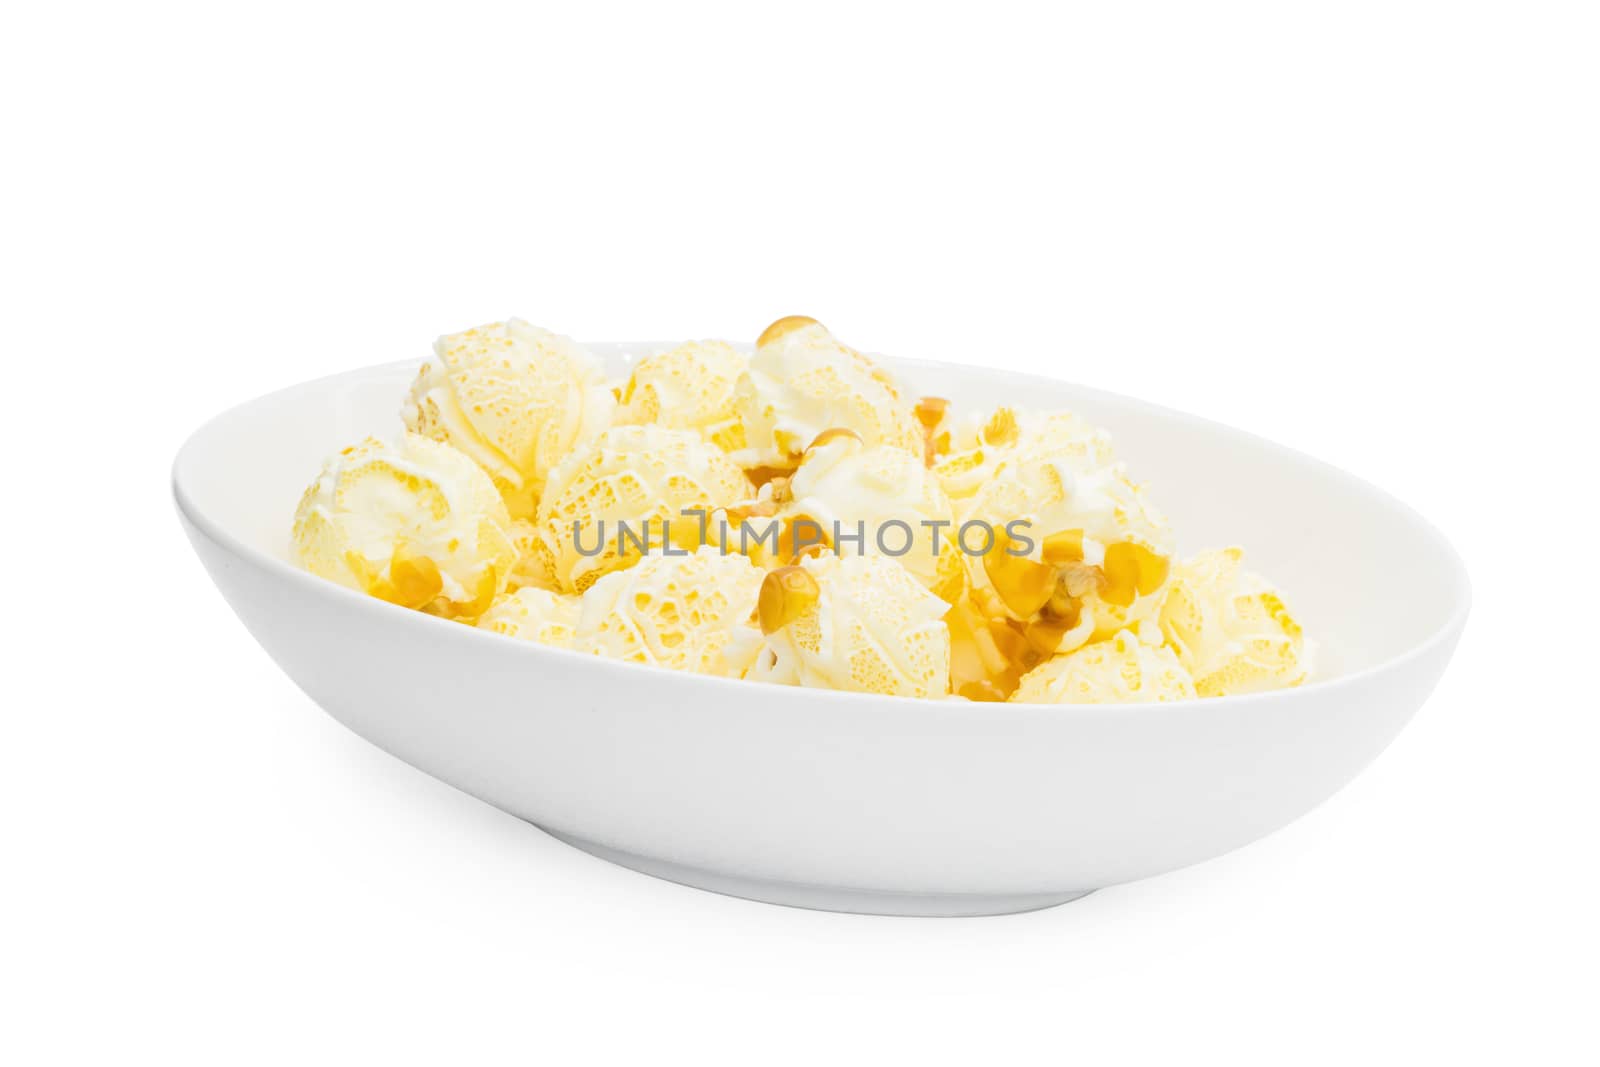 Popcorn in a plate isolated on white background by kaiskynet